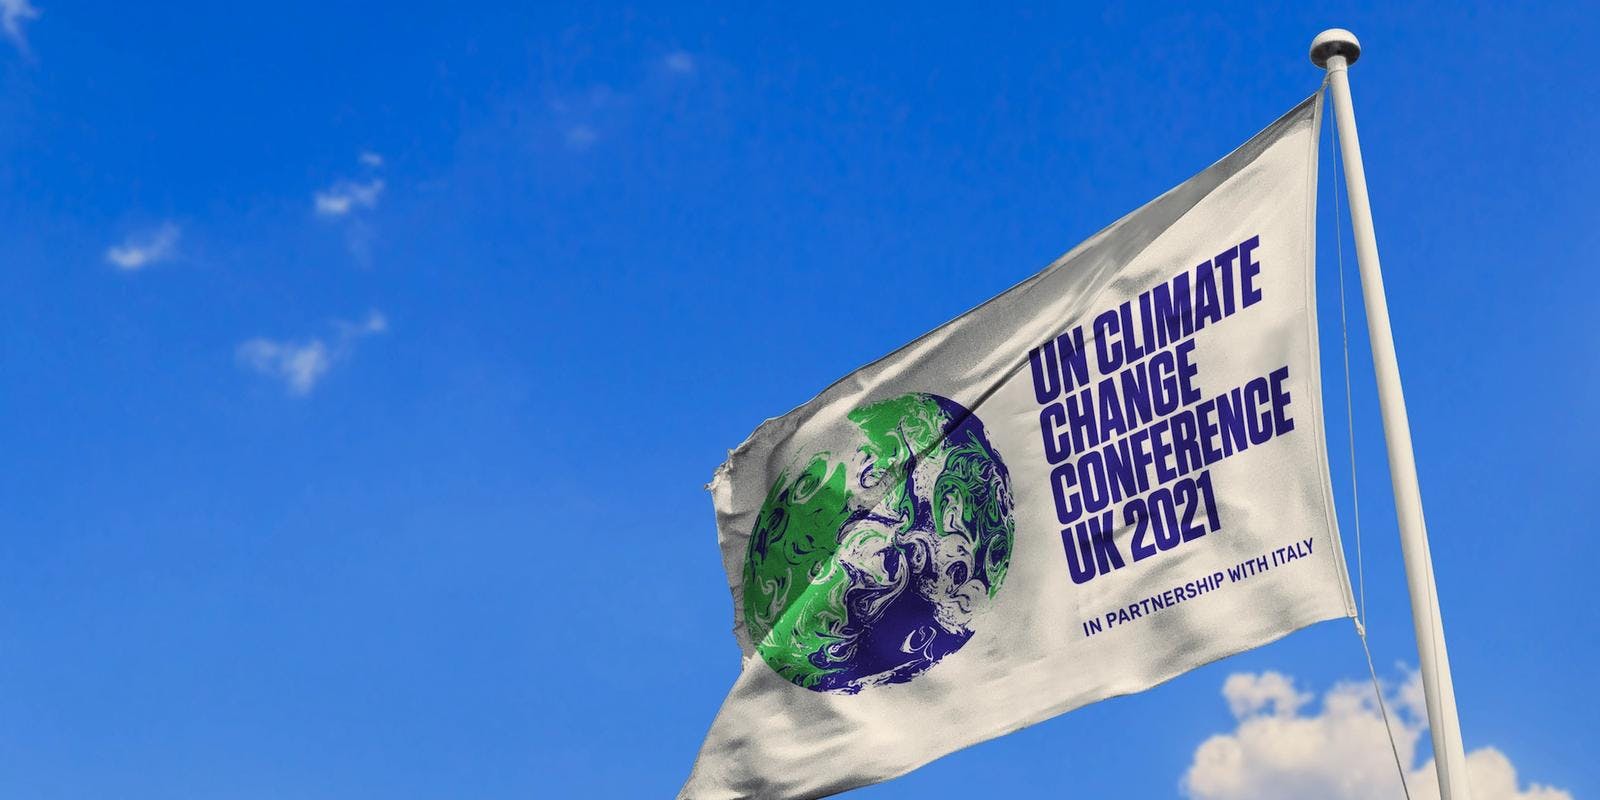 UN Climate Conference flag flying at the top of a flagpole in front of a bright blue sky